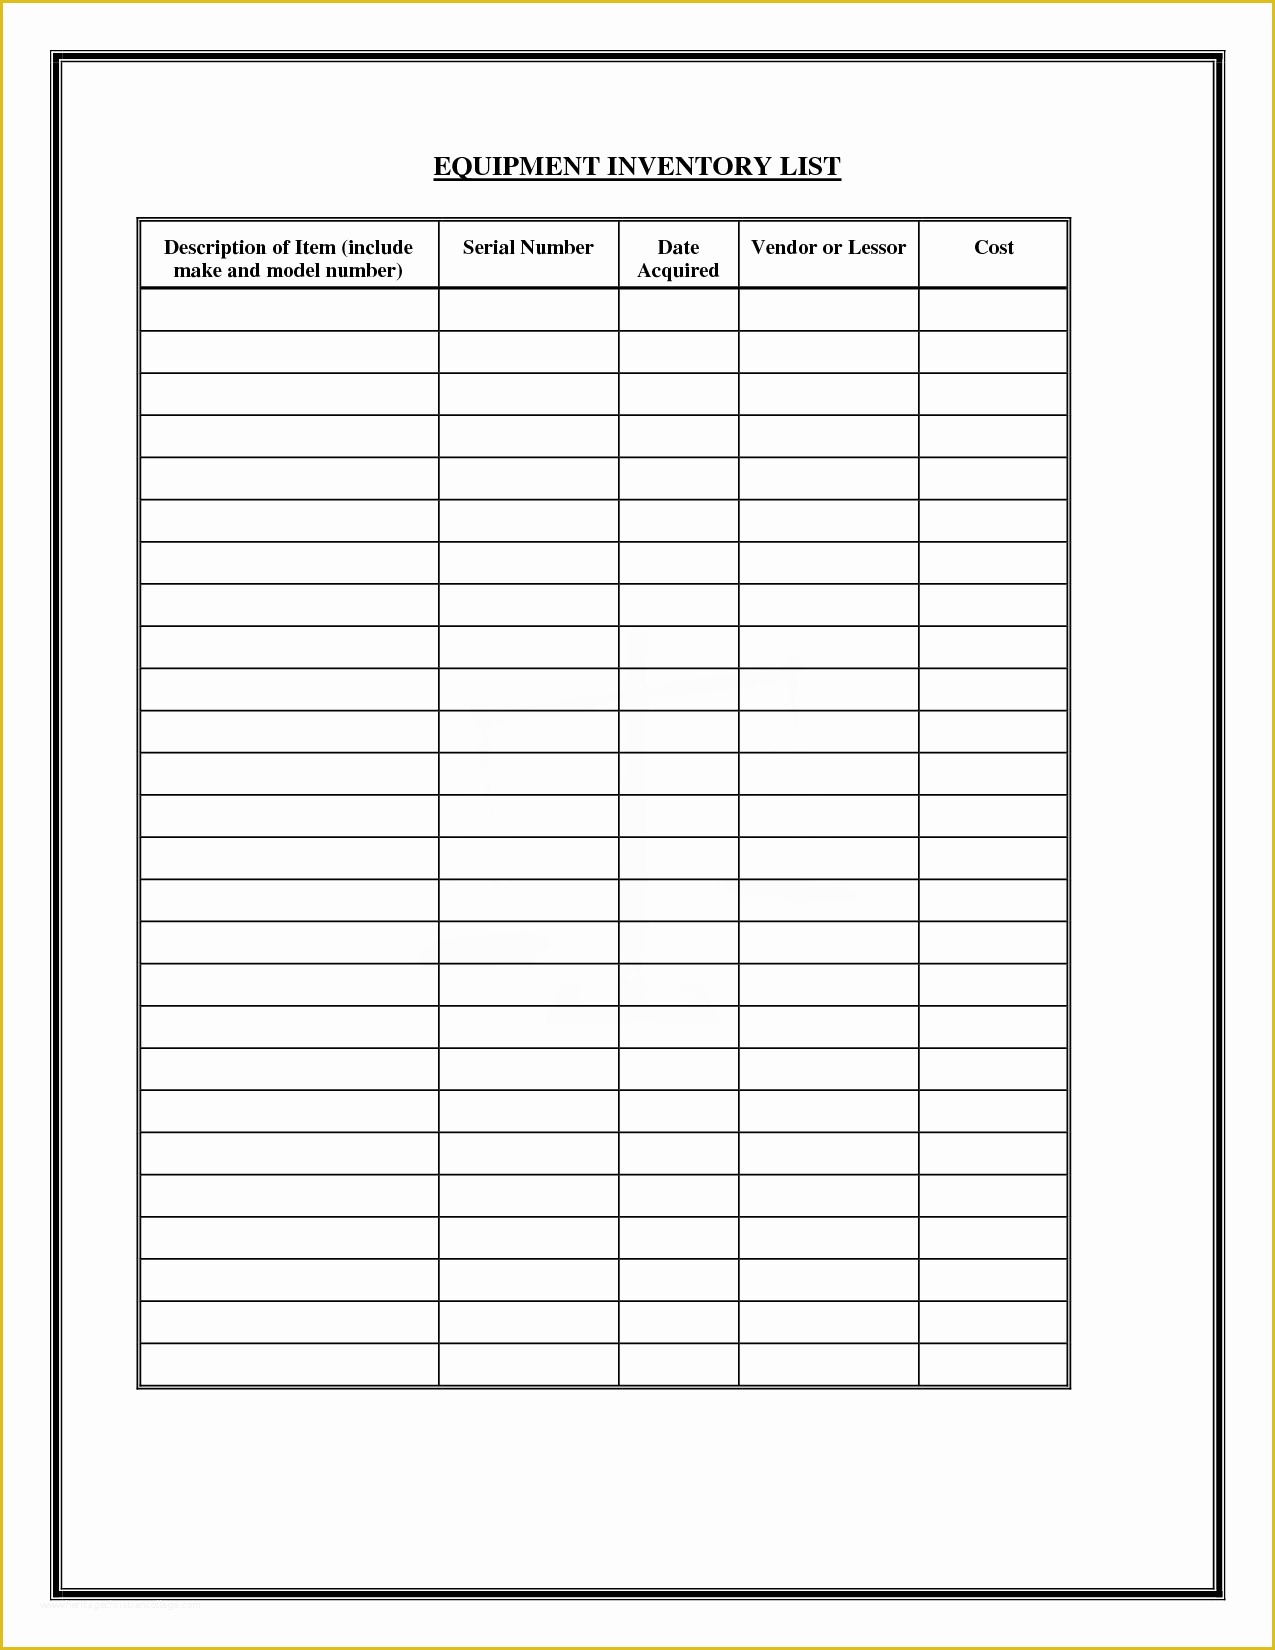 Equipment Inventory Template Free Download Of Free Inventory forms Downloads